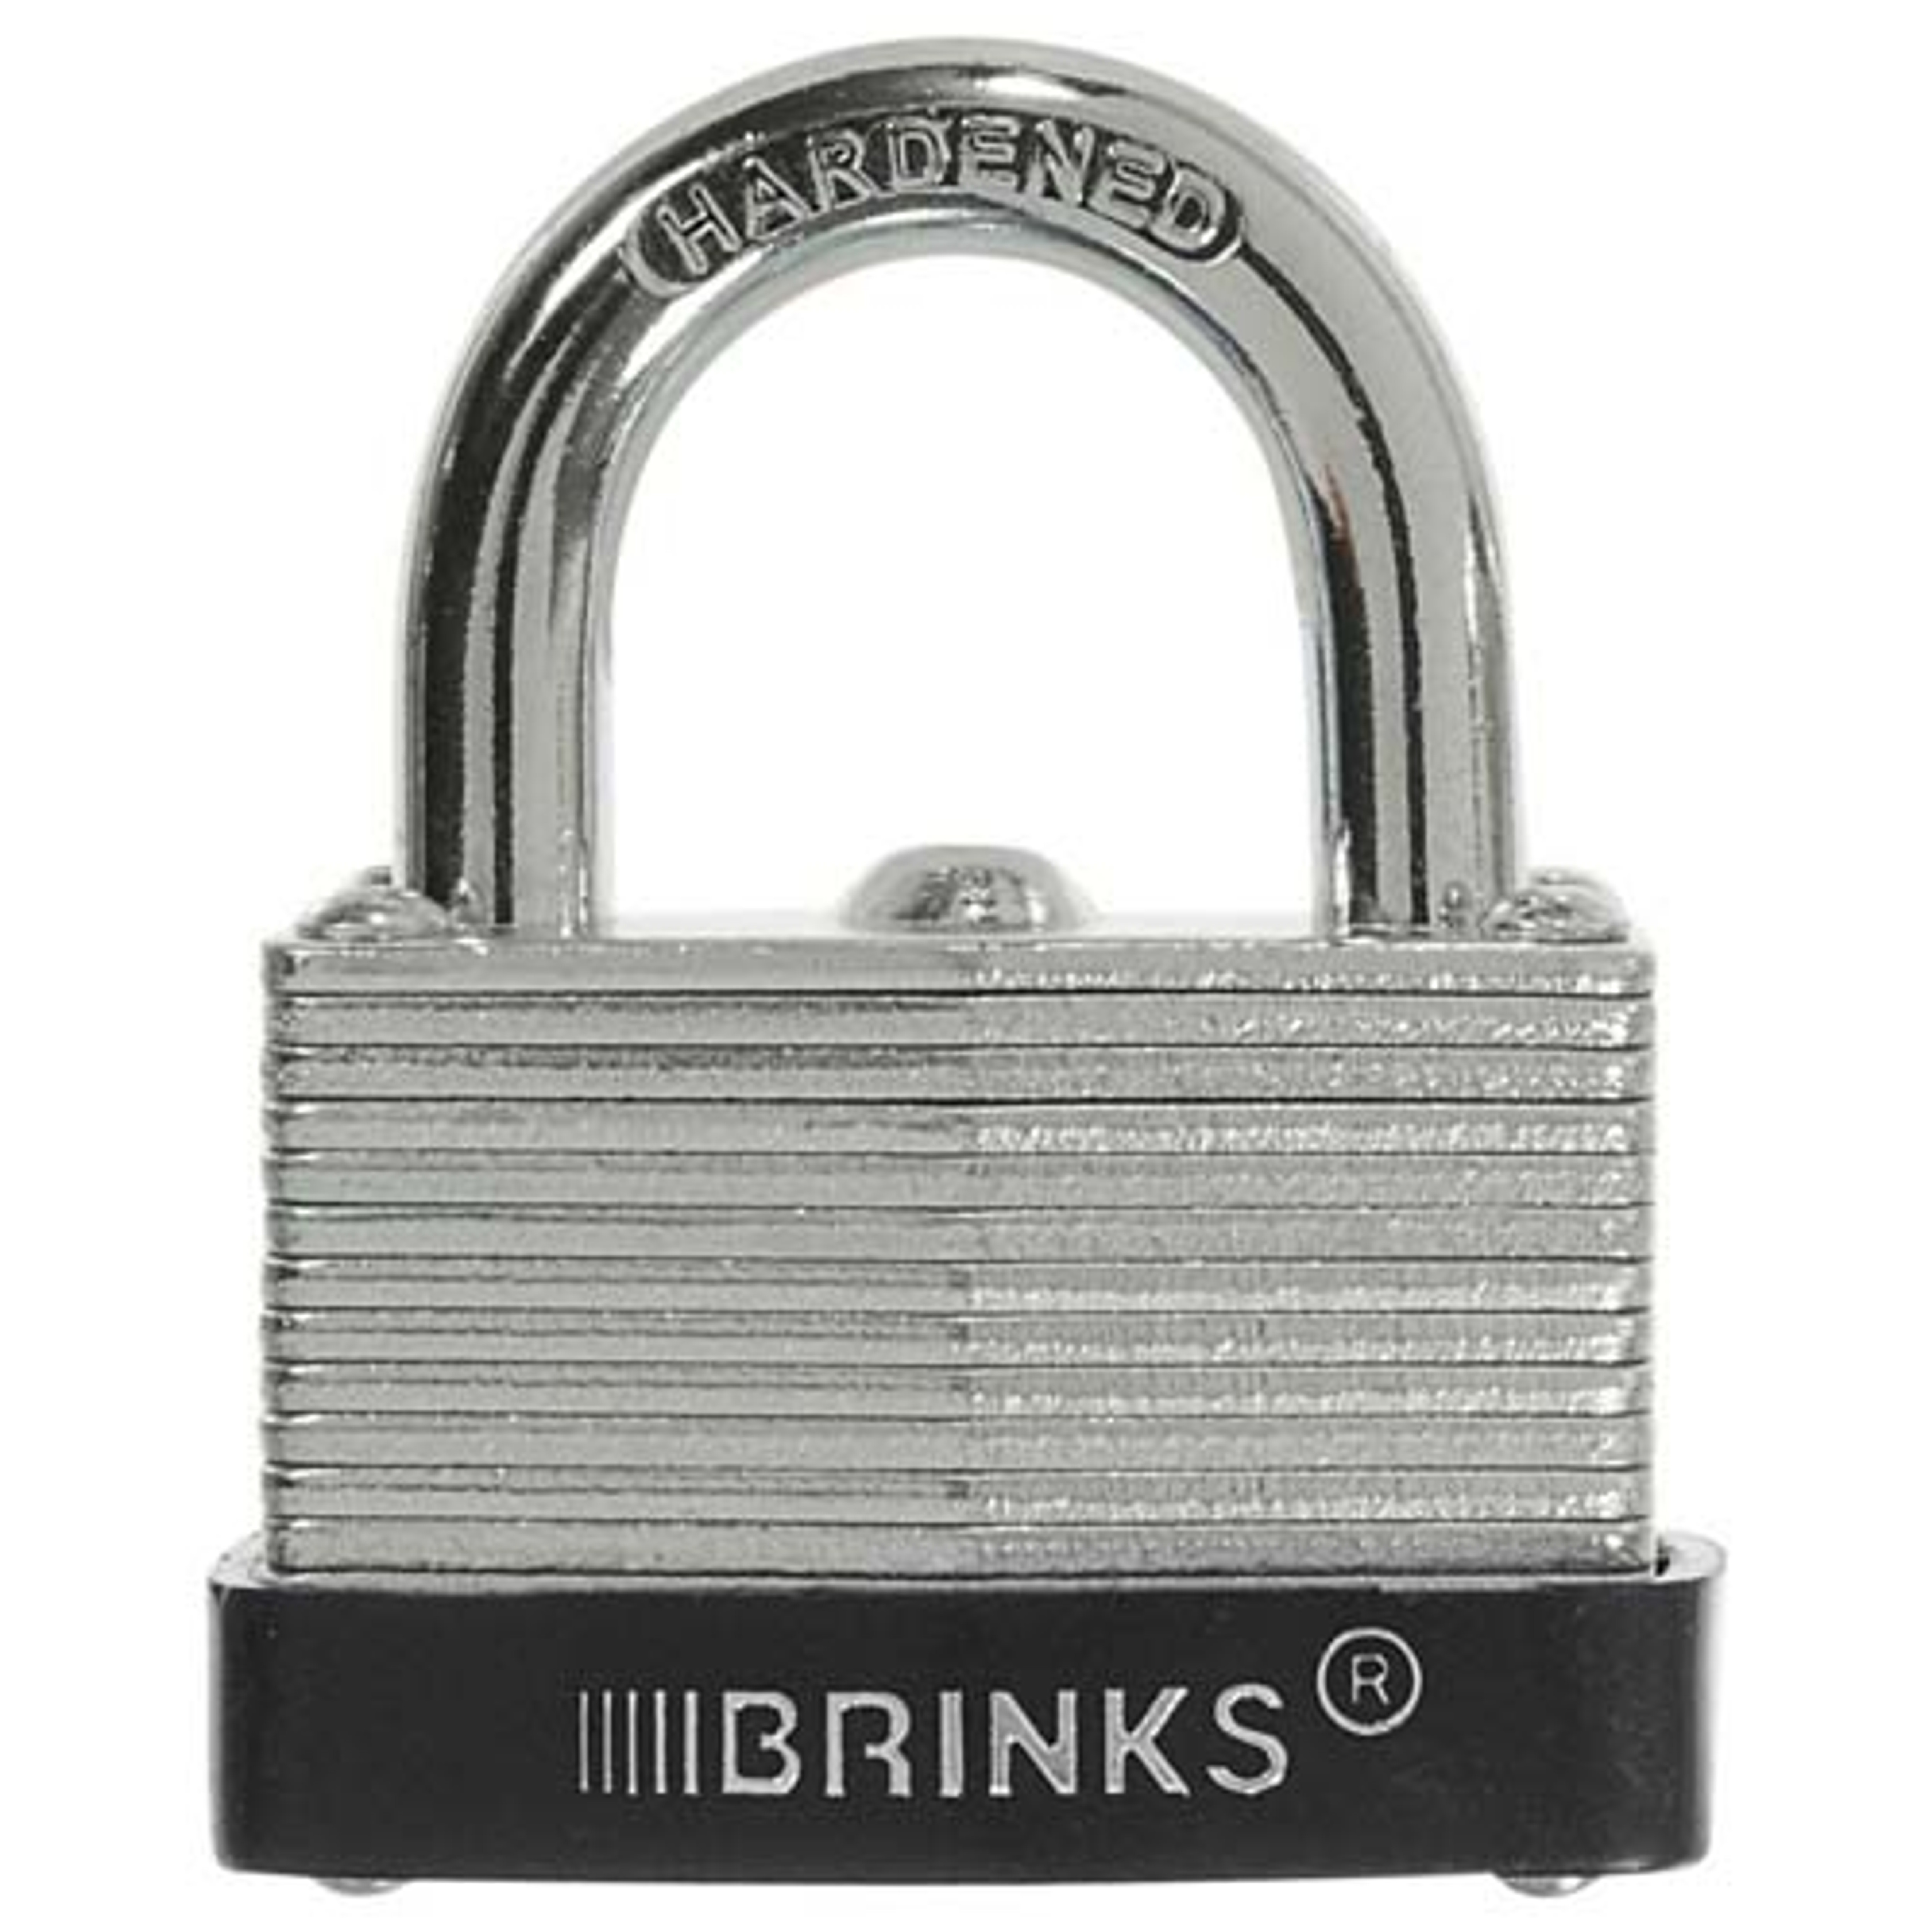 Brinks 1-9/16 in. (40 mm) Solid Brass Keyed Lock with 2 in